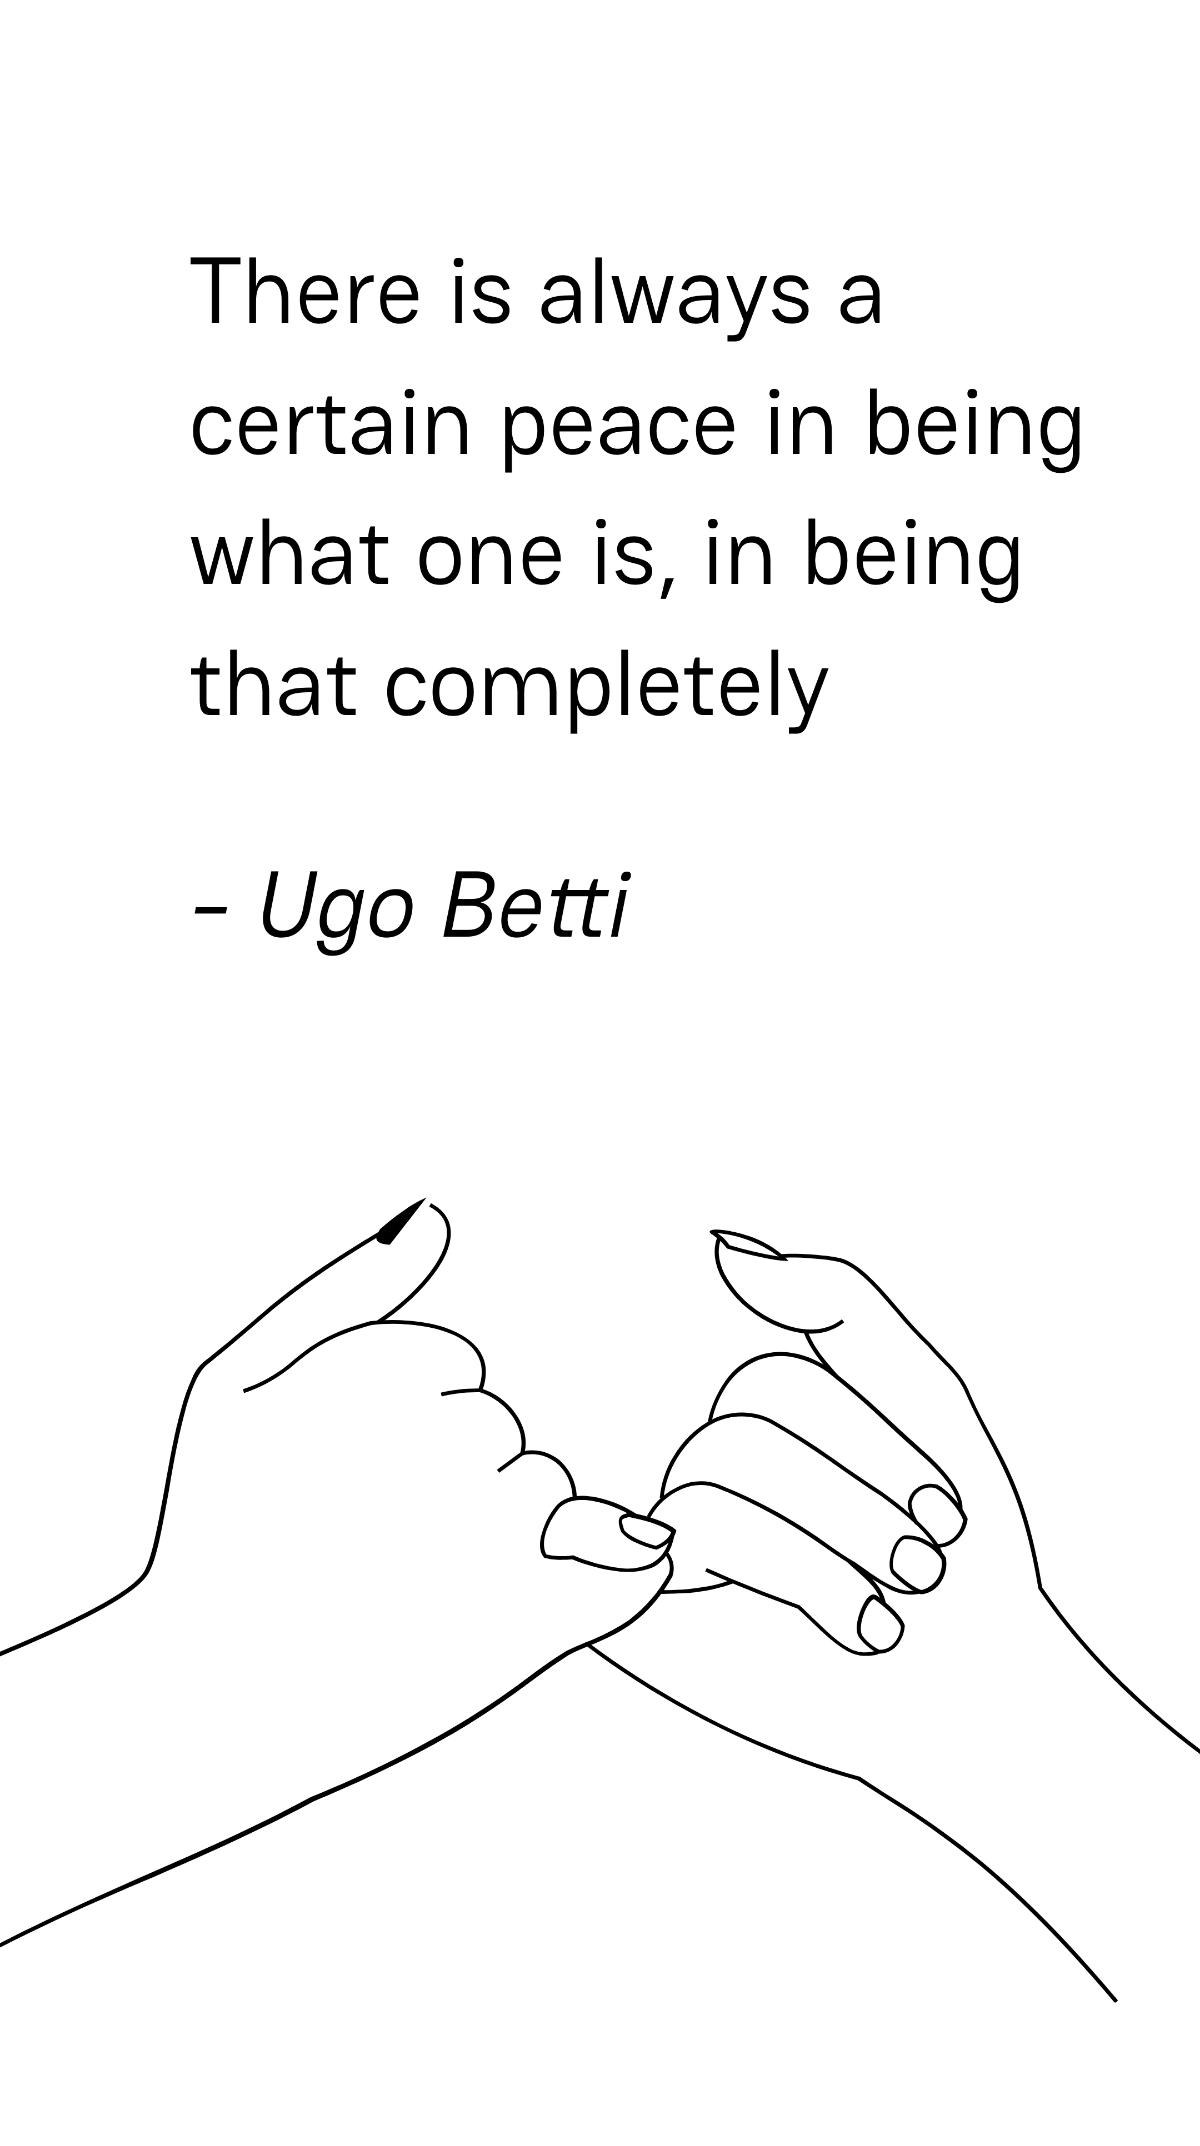 Free Ugo Betti - There is always a certain peace in being what one is, in being that completely Template